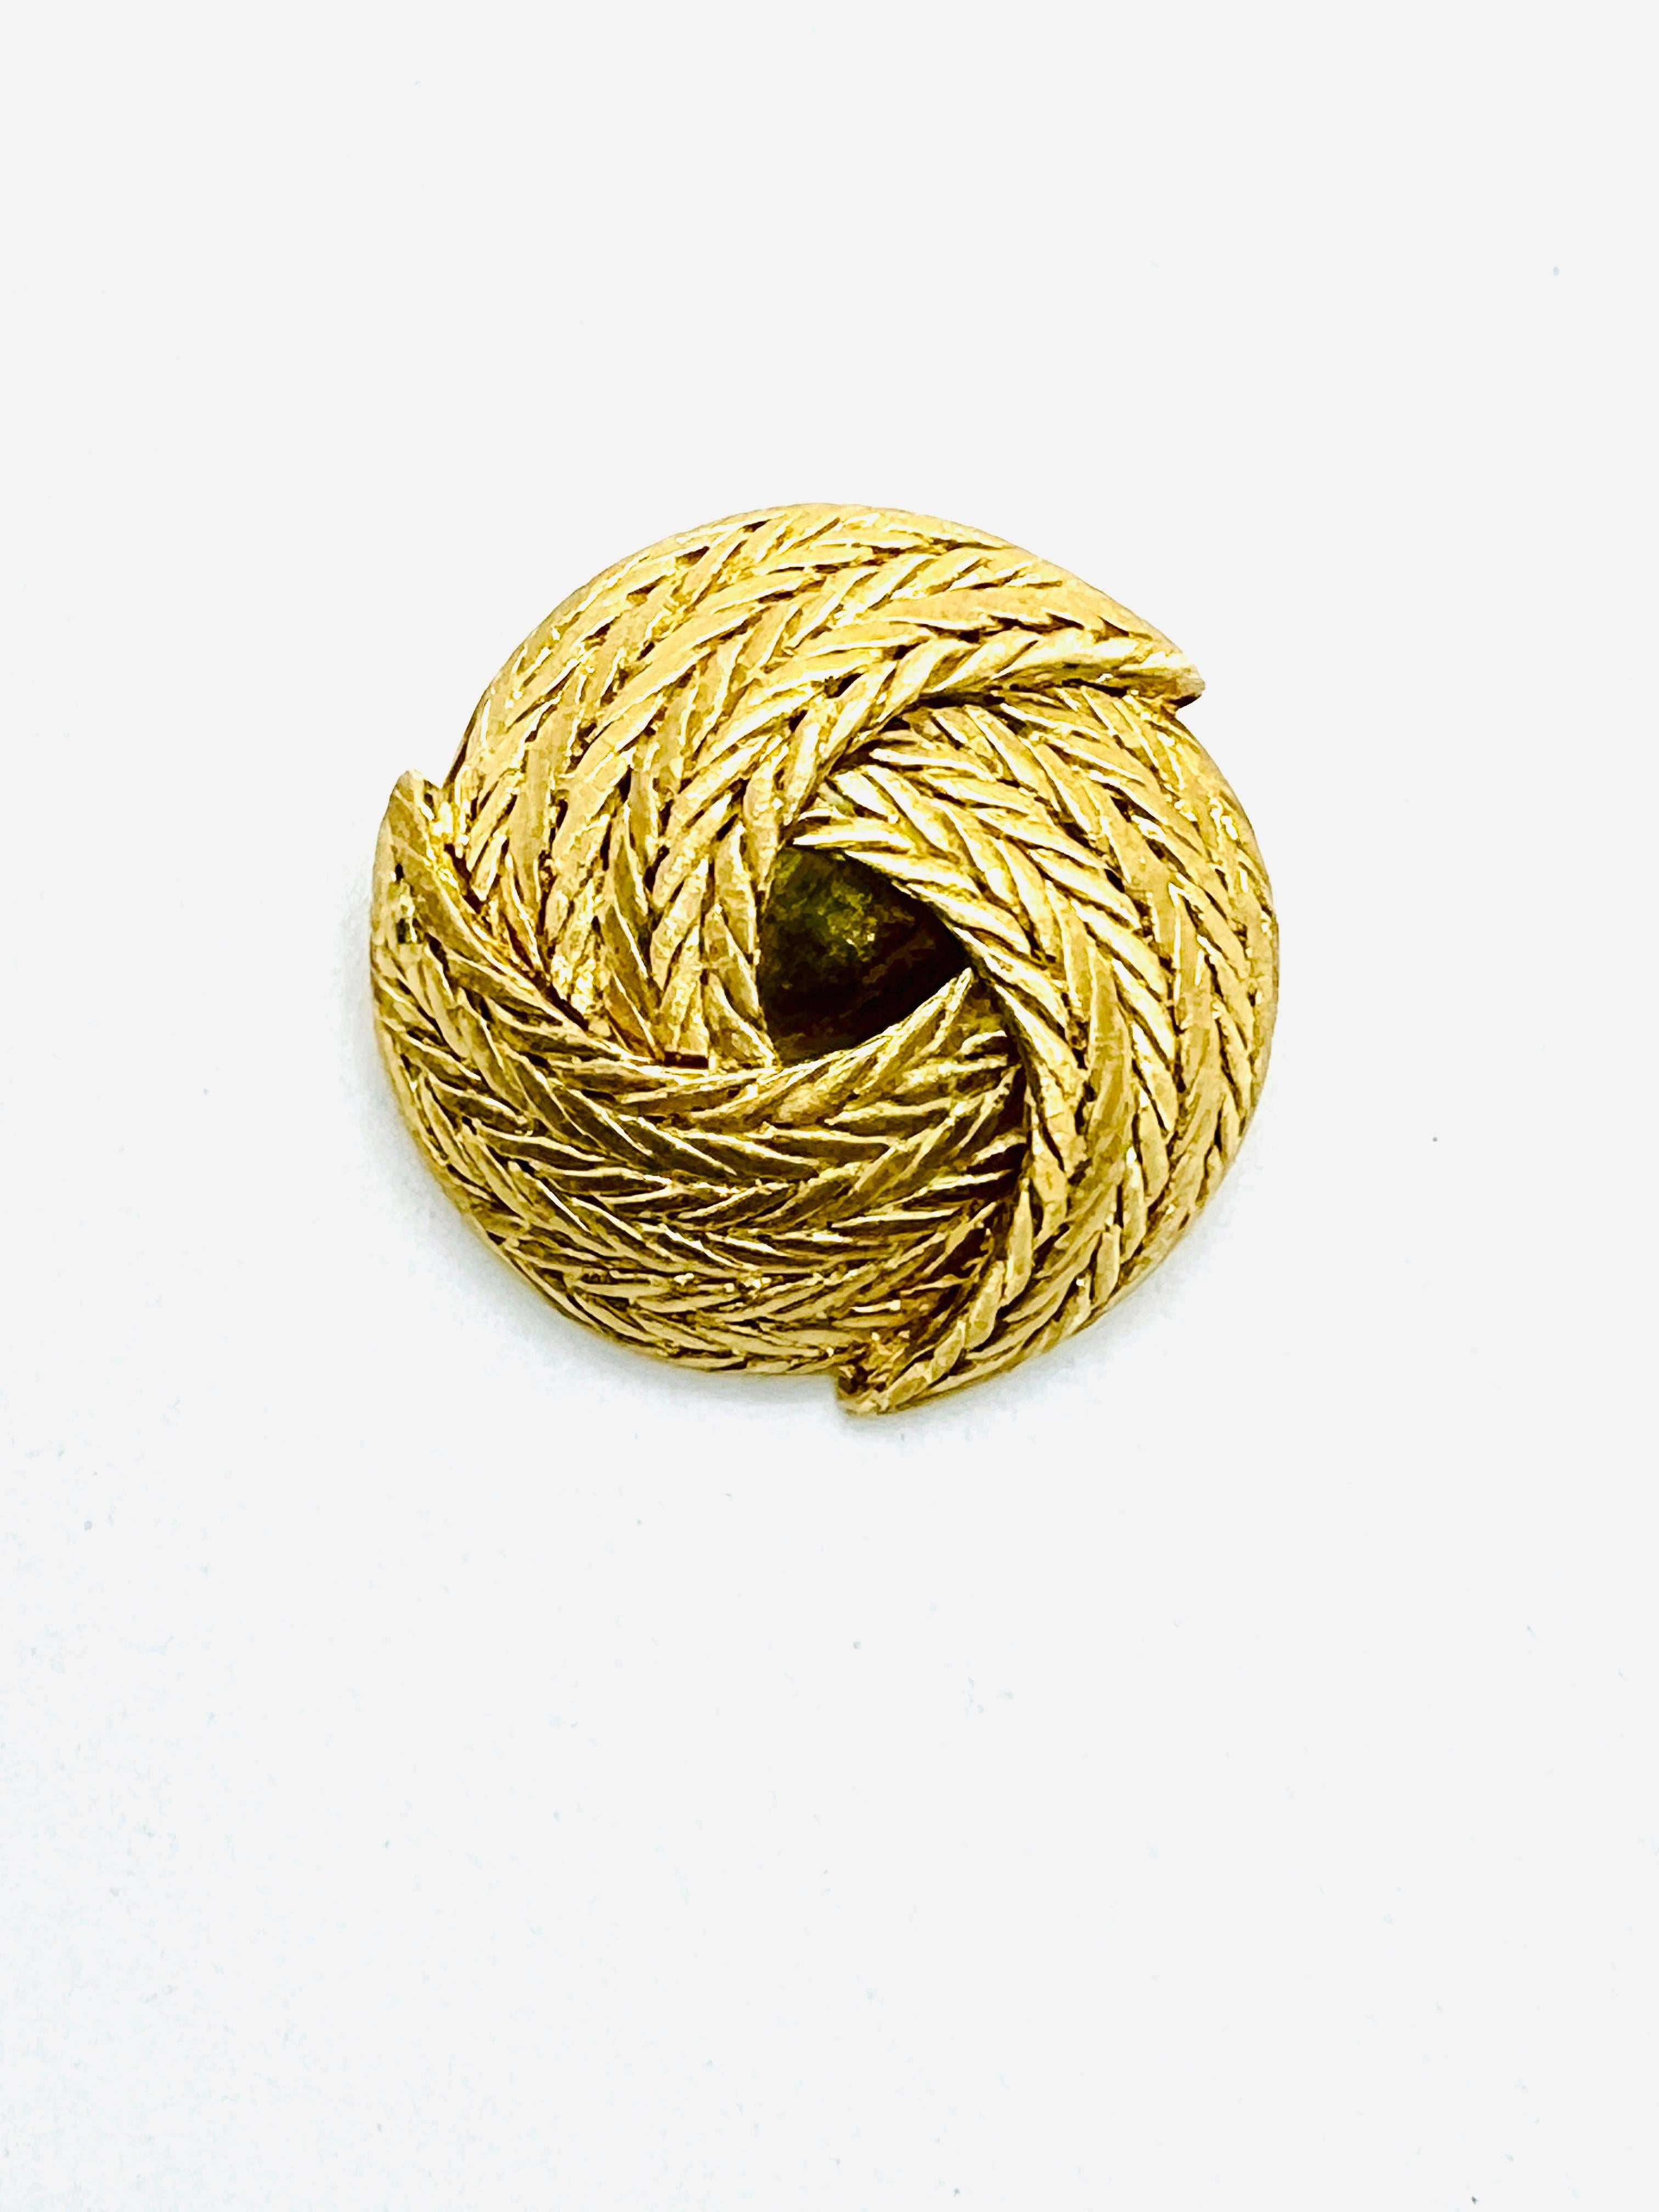 Gorgeous Designer Buccellati Round Brooch. This piece is made in 18k yellow gold. It has a gorgeous woven basket weave pattern in three overlapping sections. Measures 32mm round and weighs 19.4 grams. Engraved on the back 